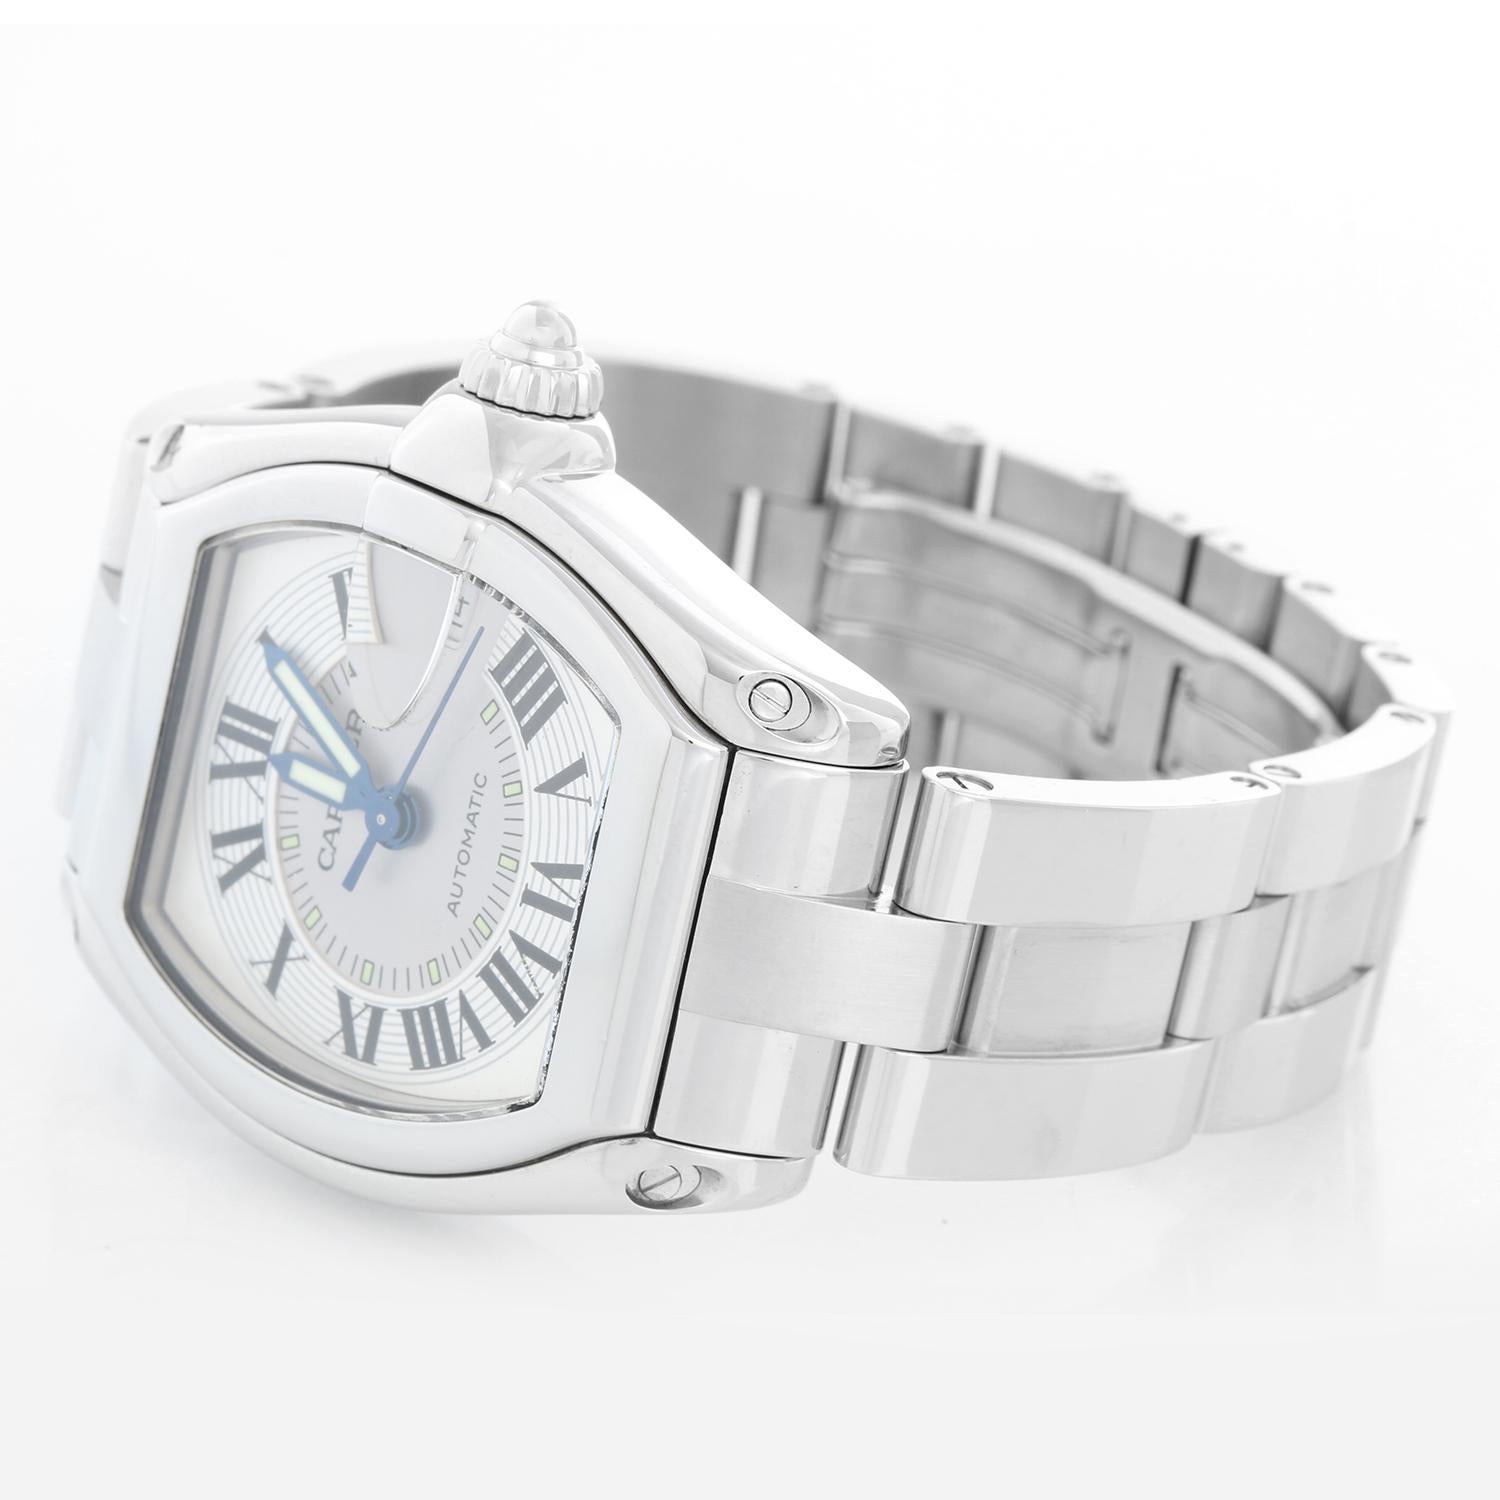 Cartier Automatic Stainless Steel Roadster  Men's Watch W62025V3 - Automatic. Stainless Steel Tonneau shaped case ( 37mm x 44mm). Silver dial with Roman numerals ; Date at 3 o'clock. Stainless Steel with double fold clasp. Pre-owned with custom box .